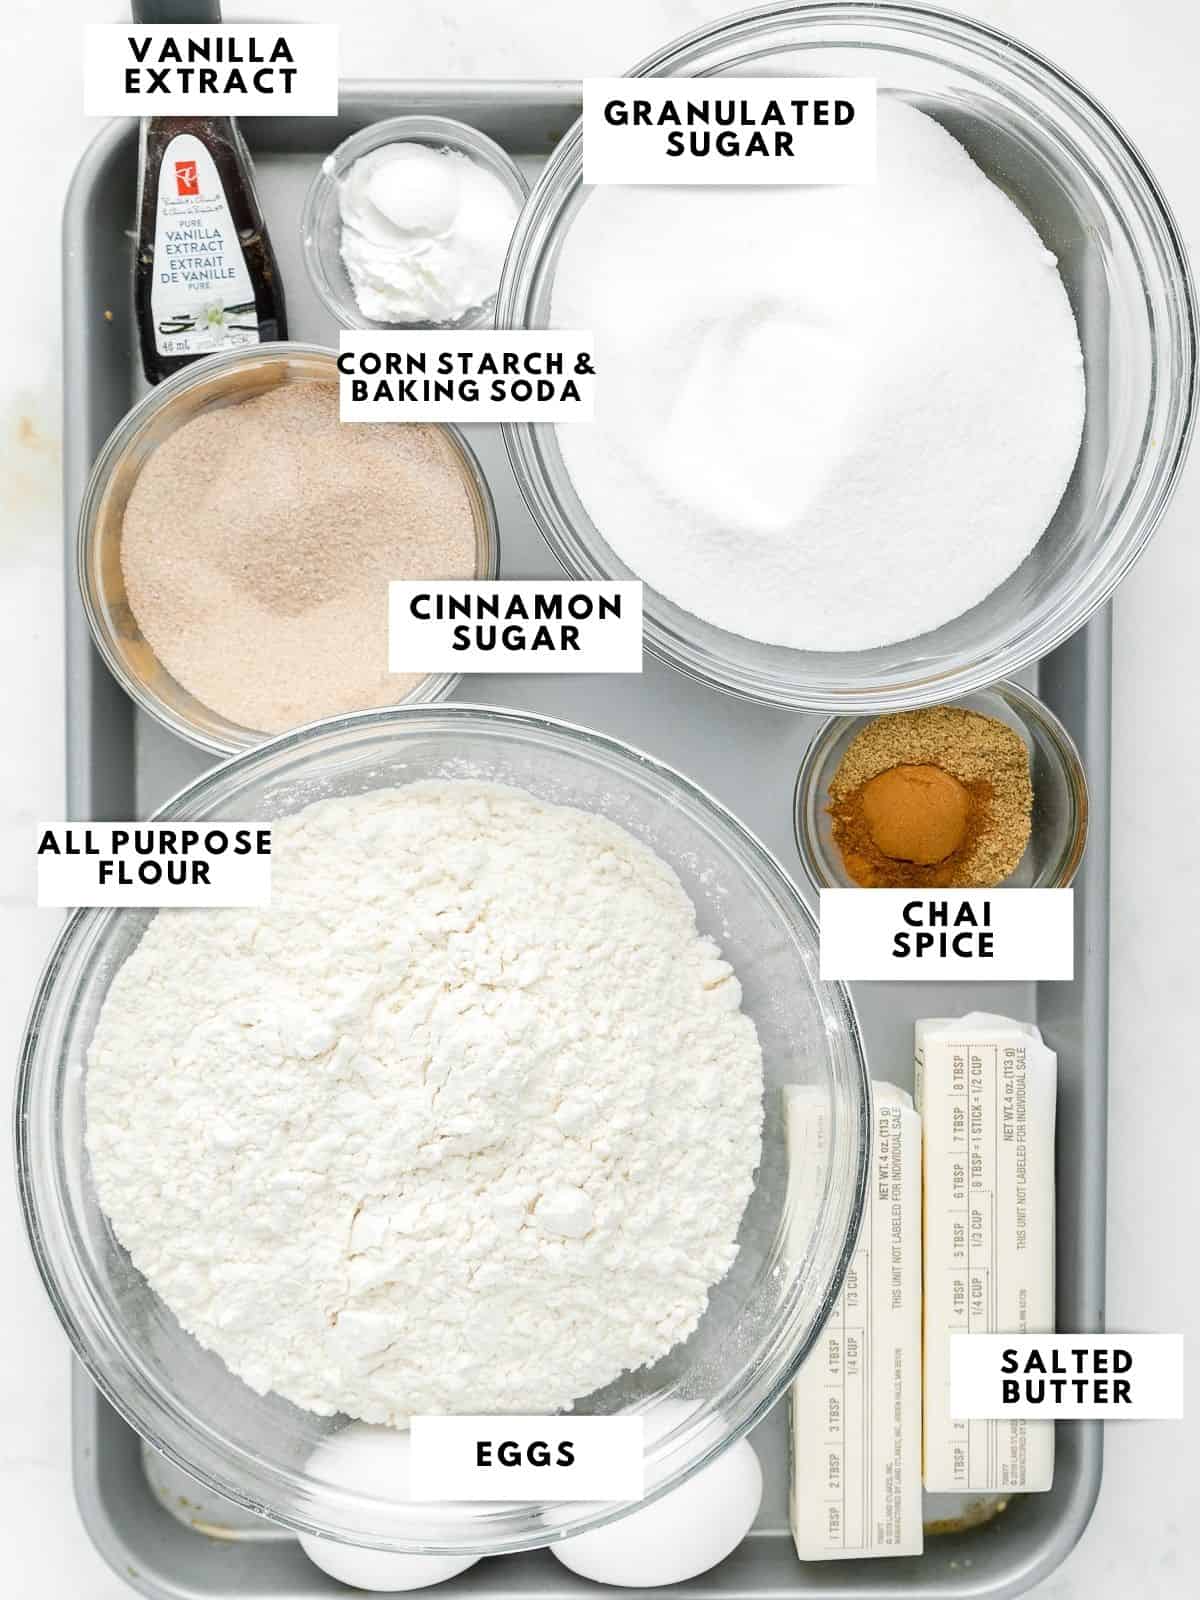 Photo of ingredients: granulated sugar, vanilla extract, corn starch & baking soda, cinnamon sugar, chai spice, all purpose flour, eggs, and salted butter